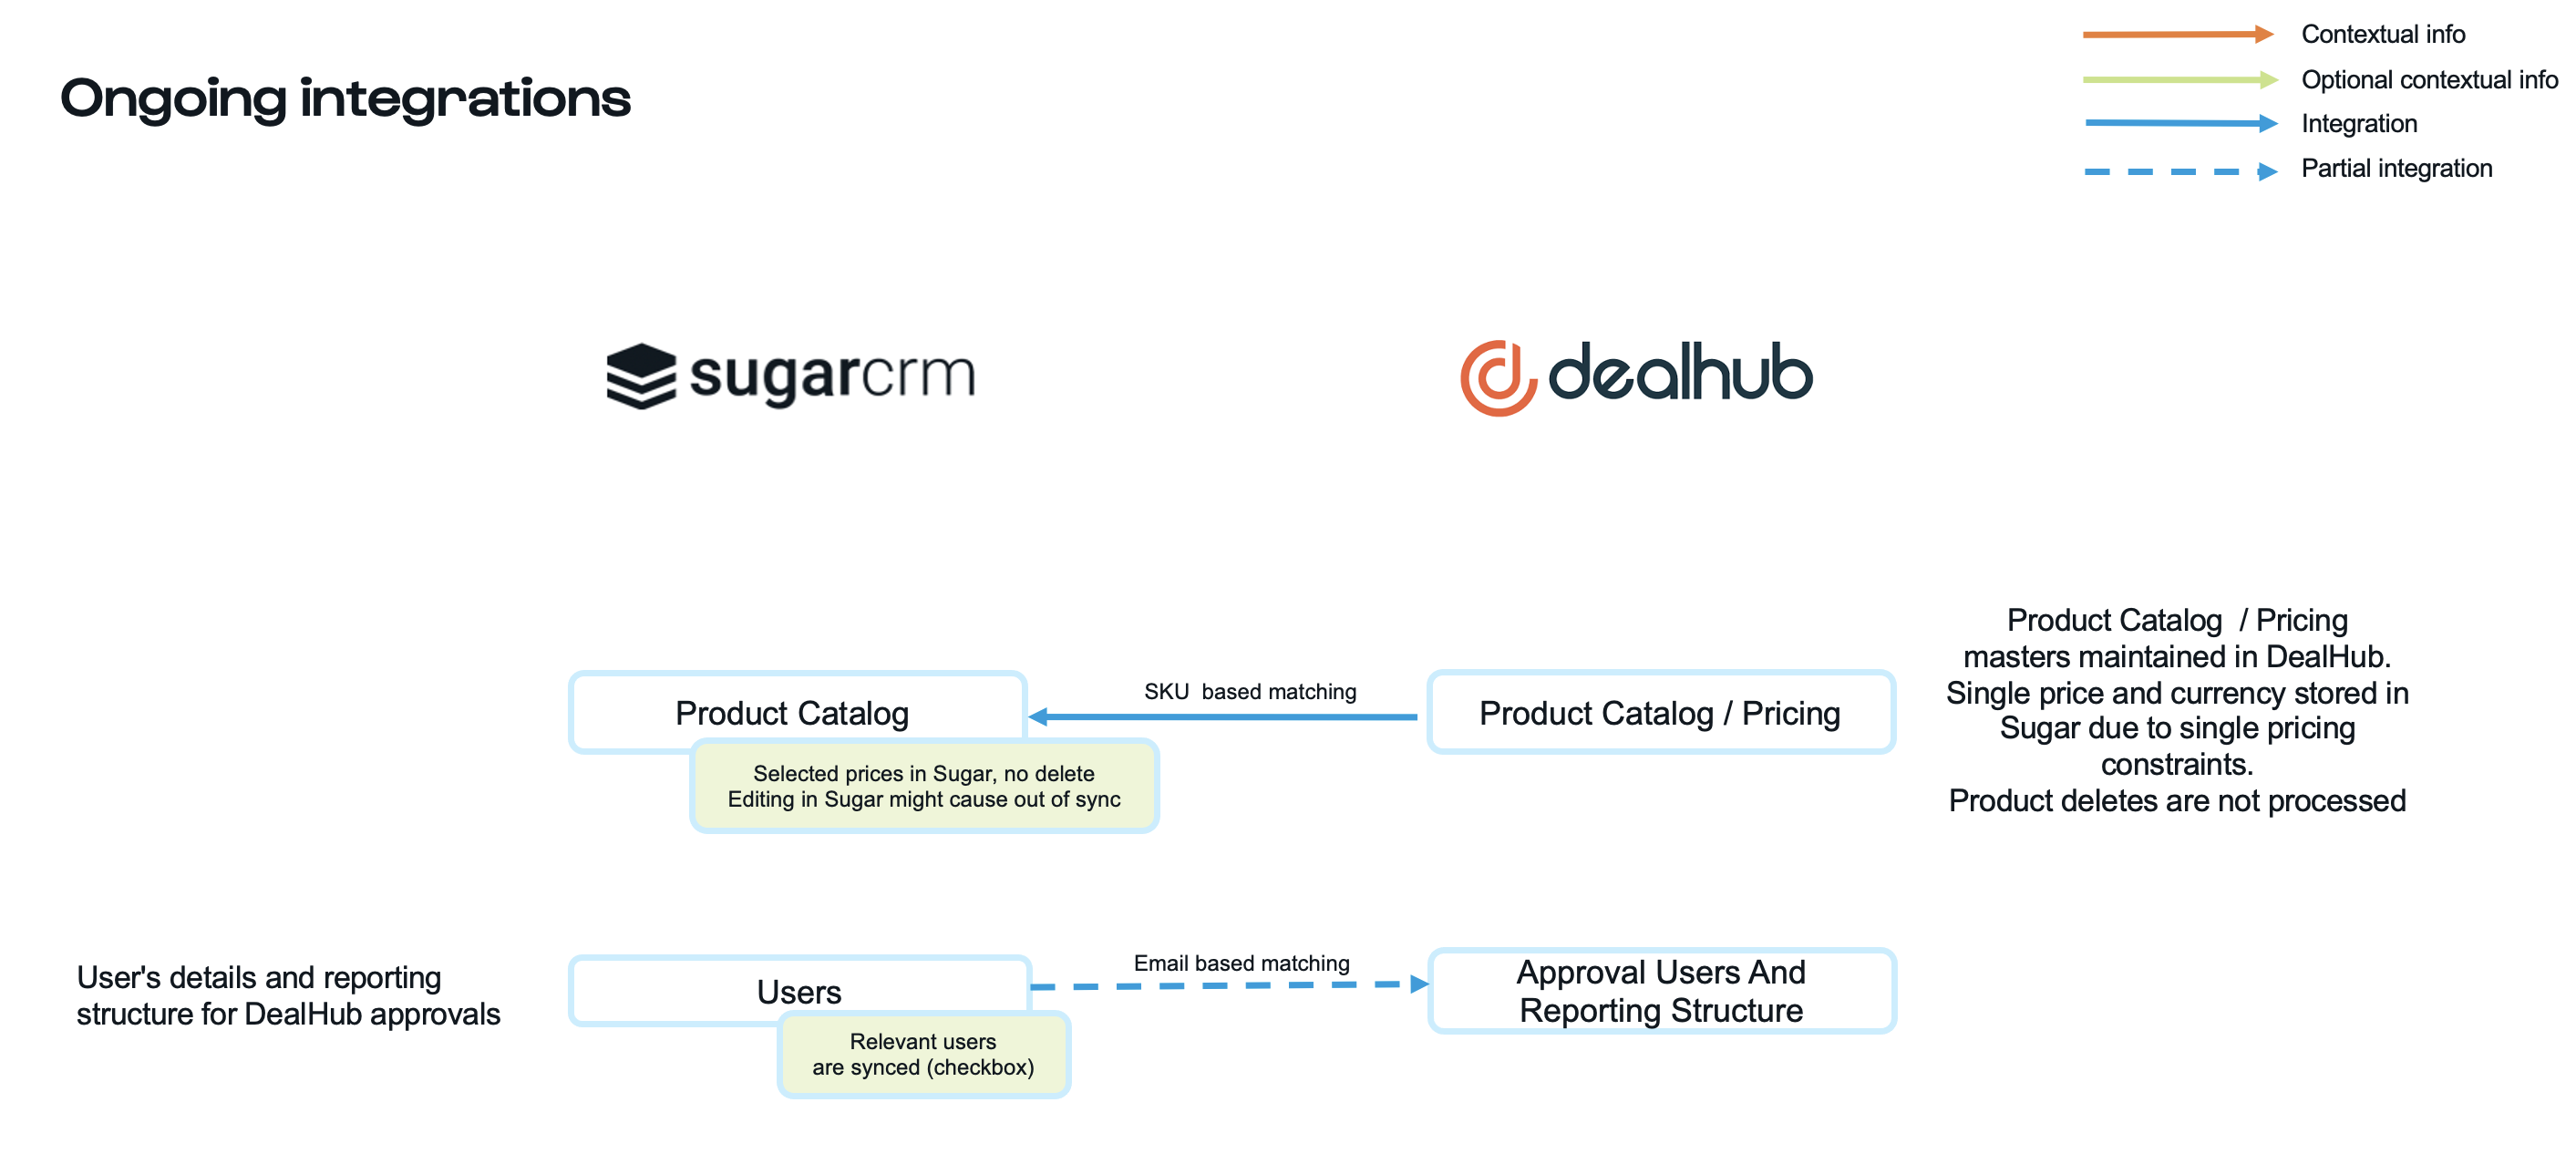 dealhub-ongoing-integrations.png